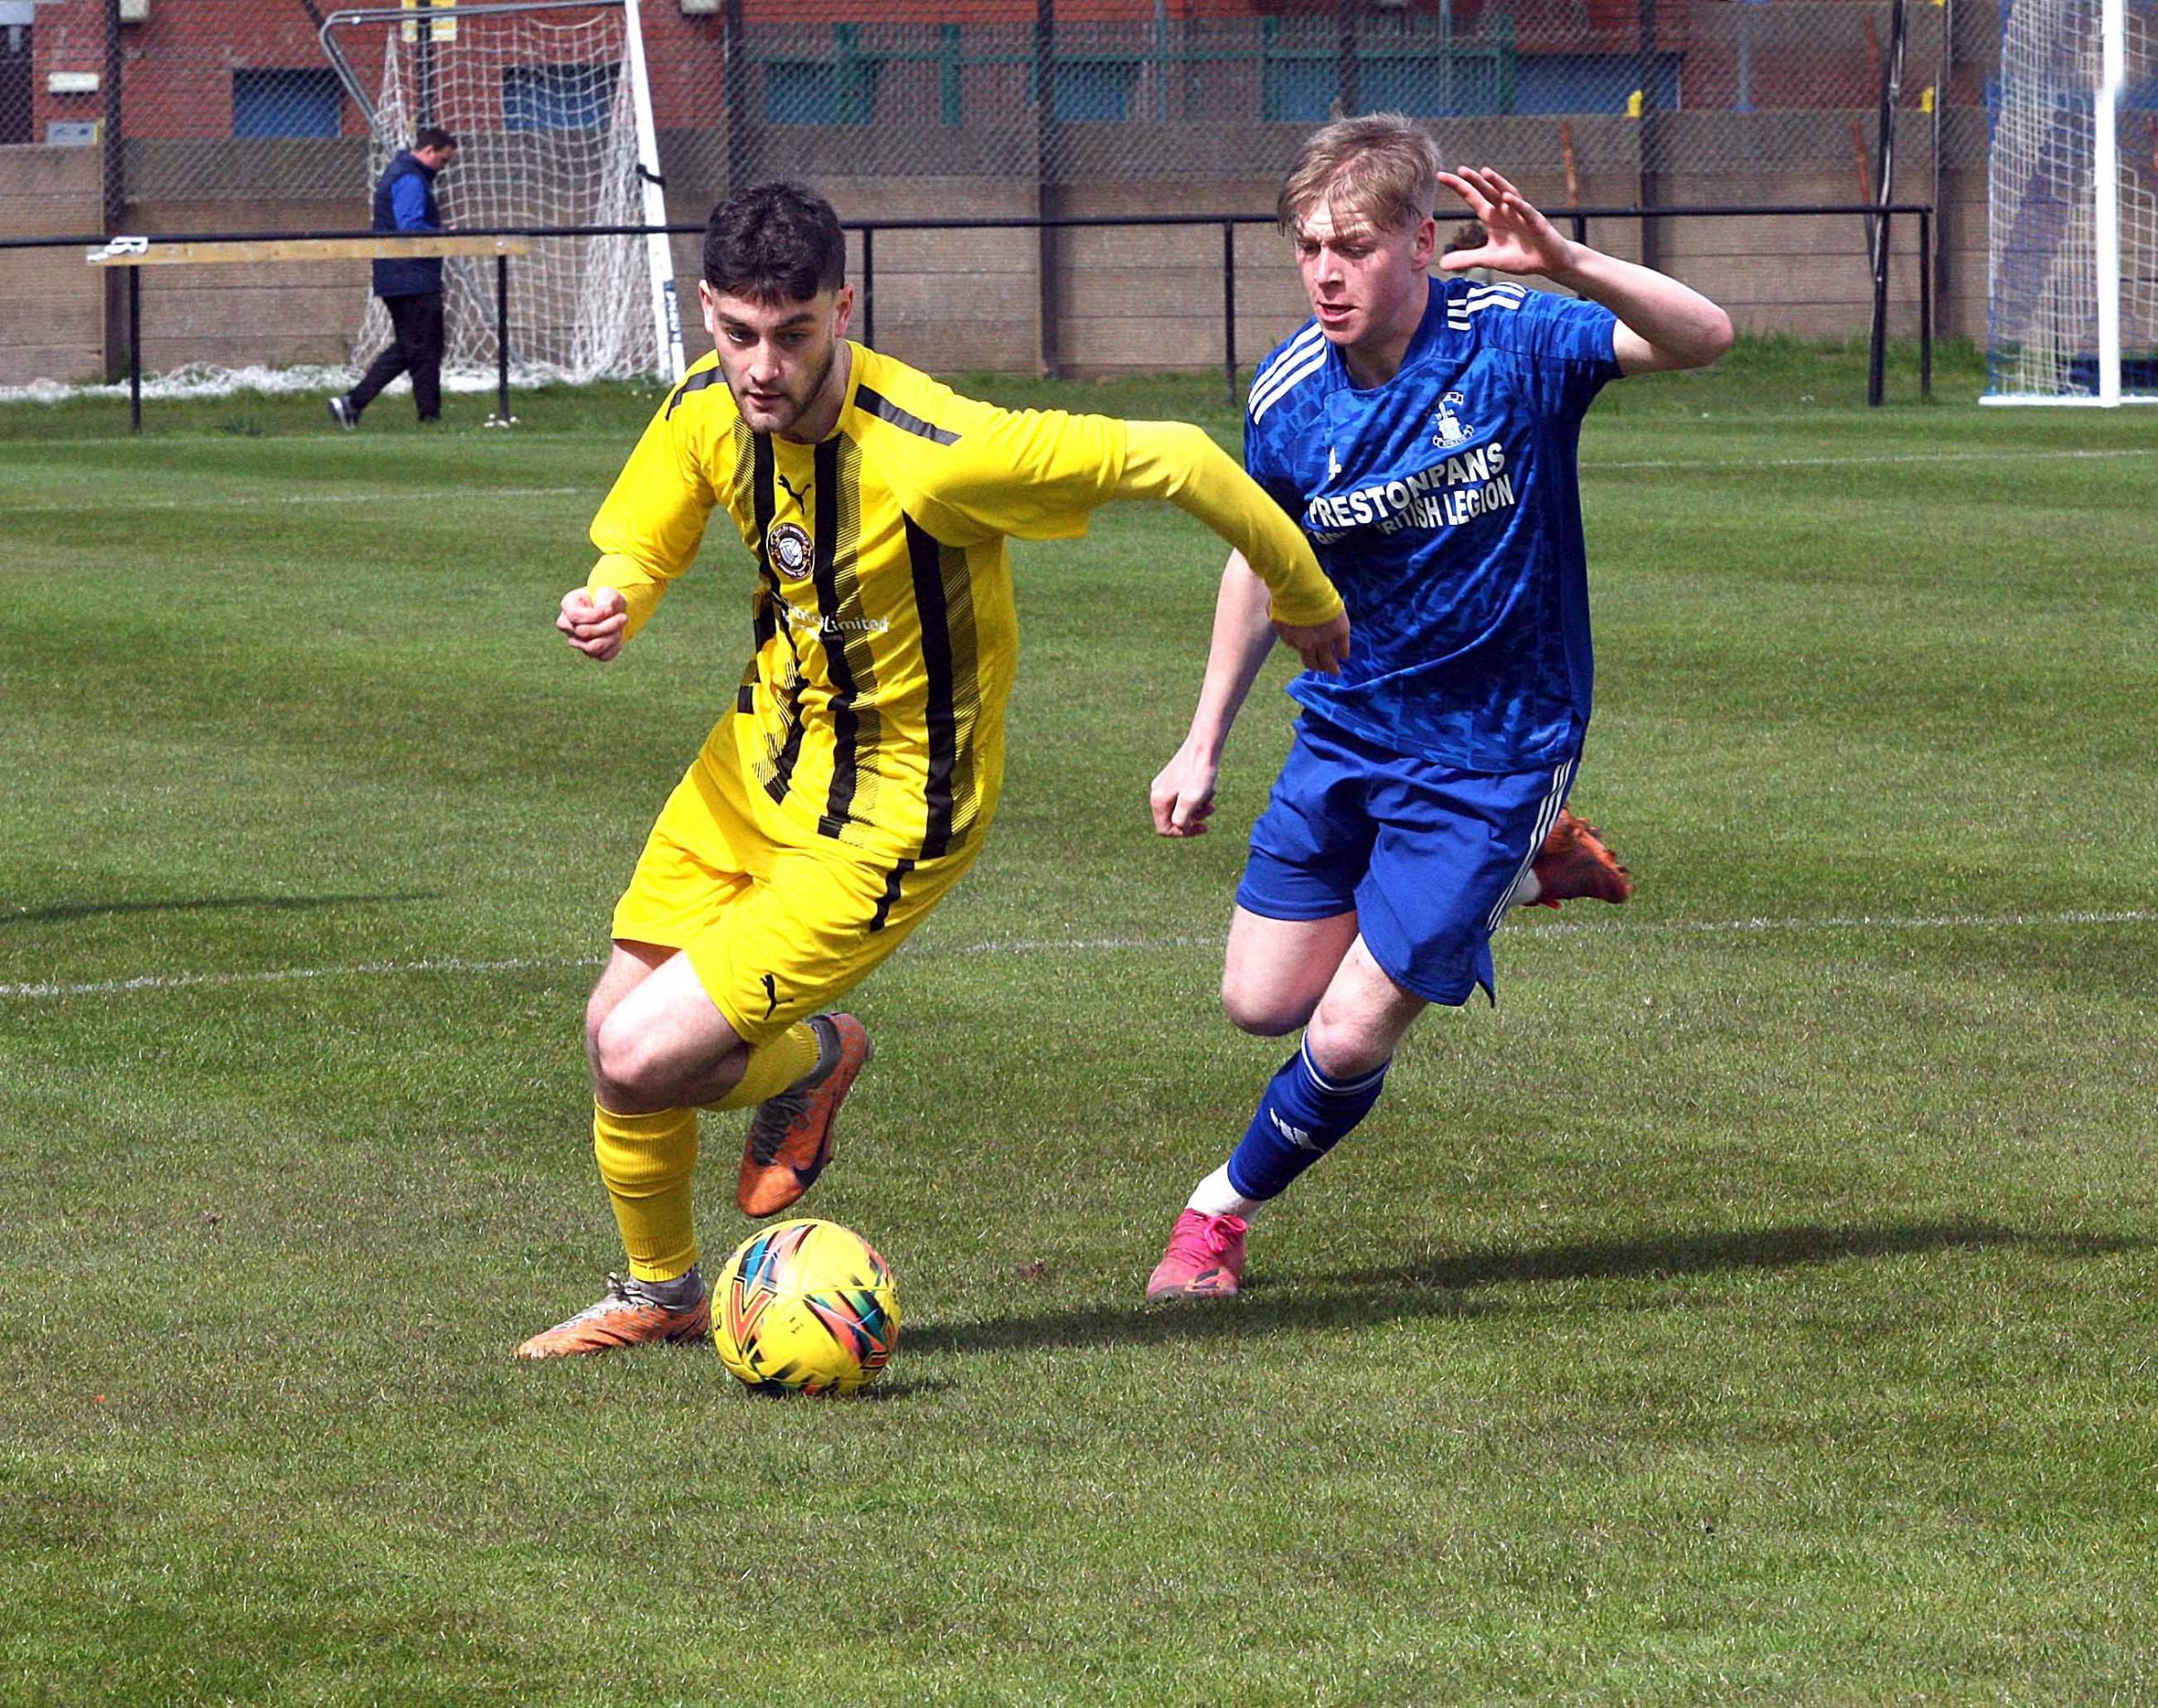 Preston Athletic (blue) picked up three valuable points against Oakley United last weekend